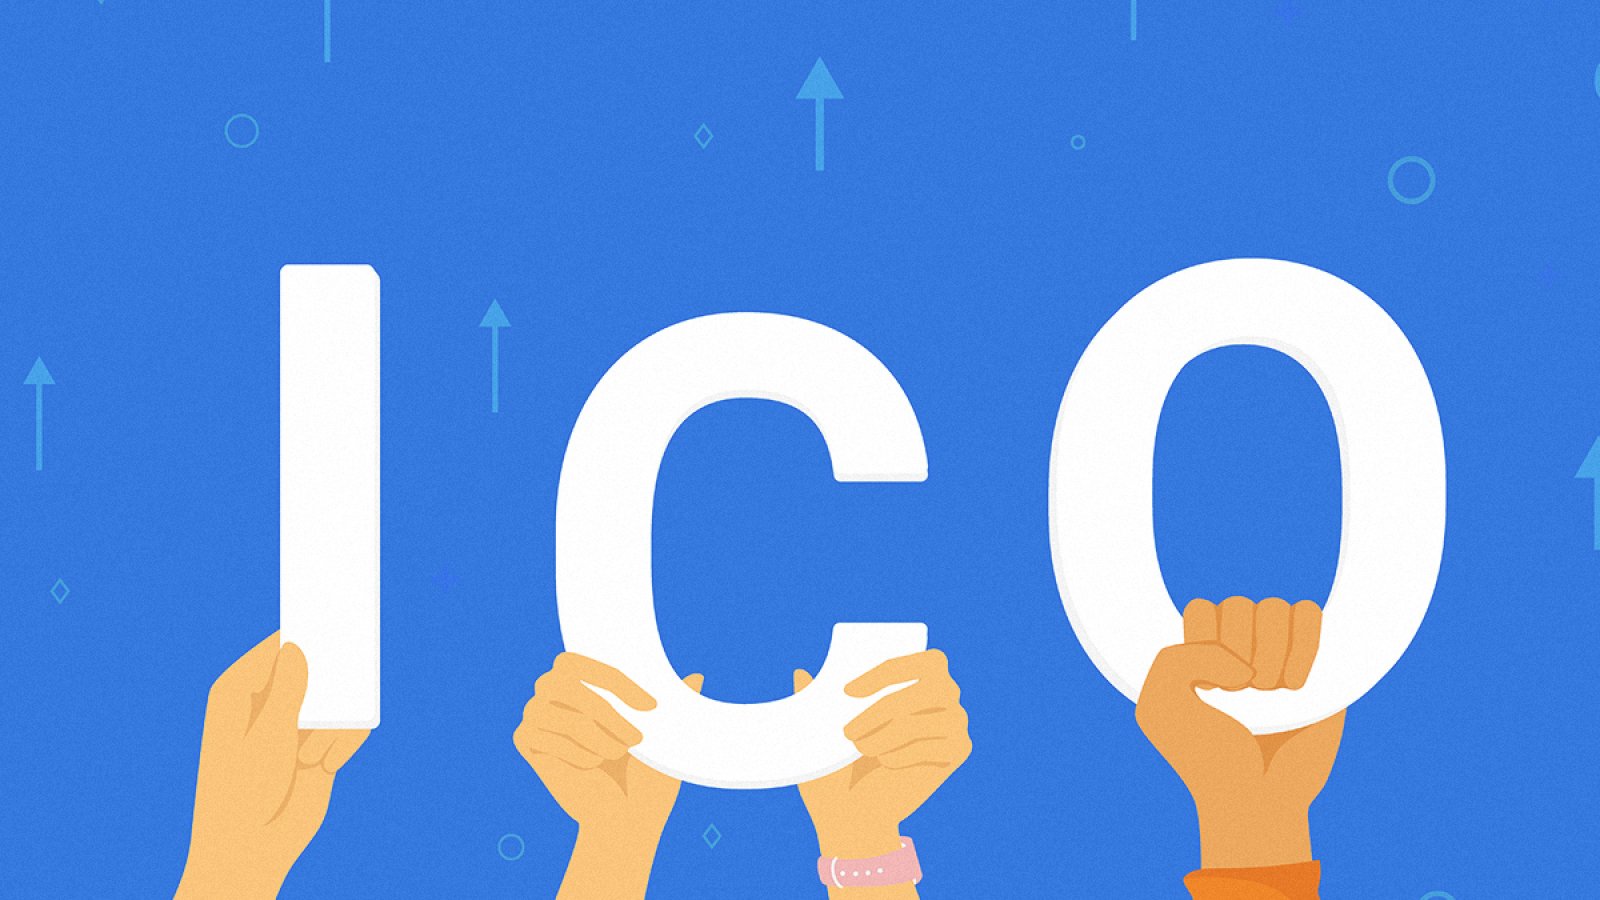 Top 10 ICOs by Funds Raised, From Filecoin to TRON